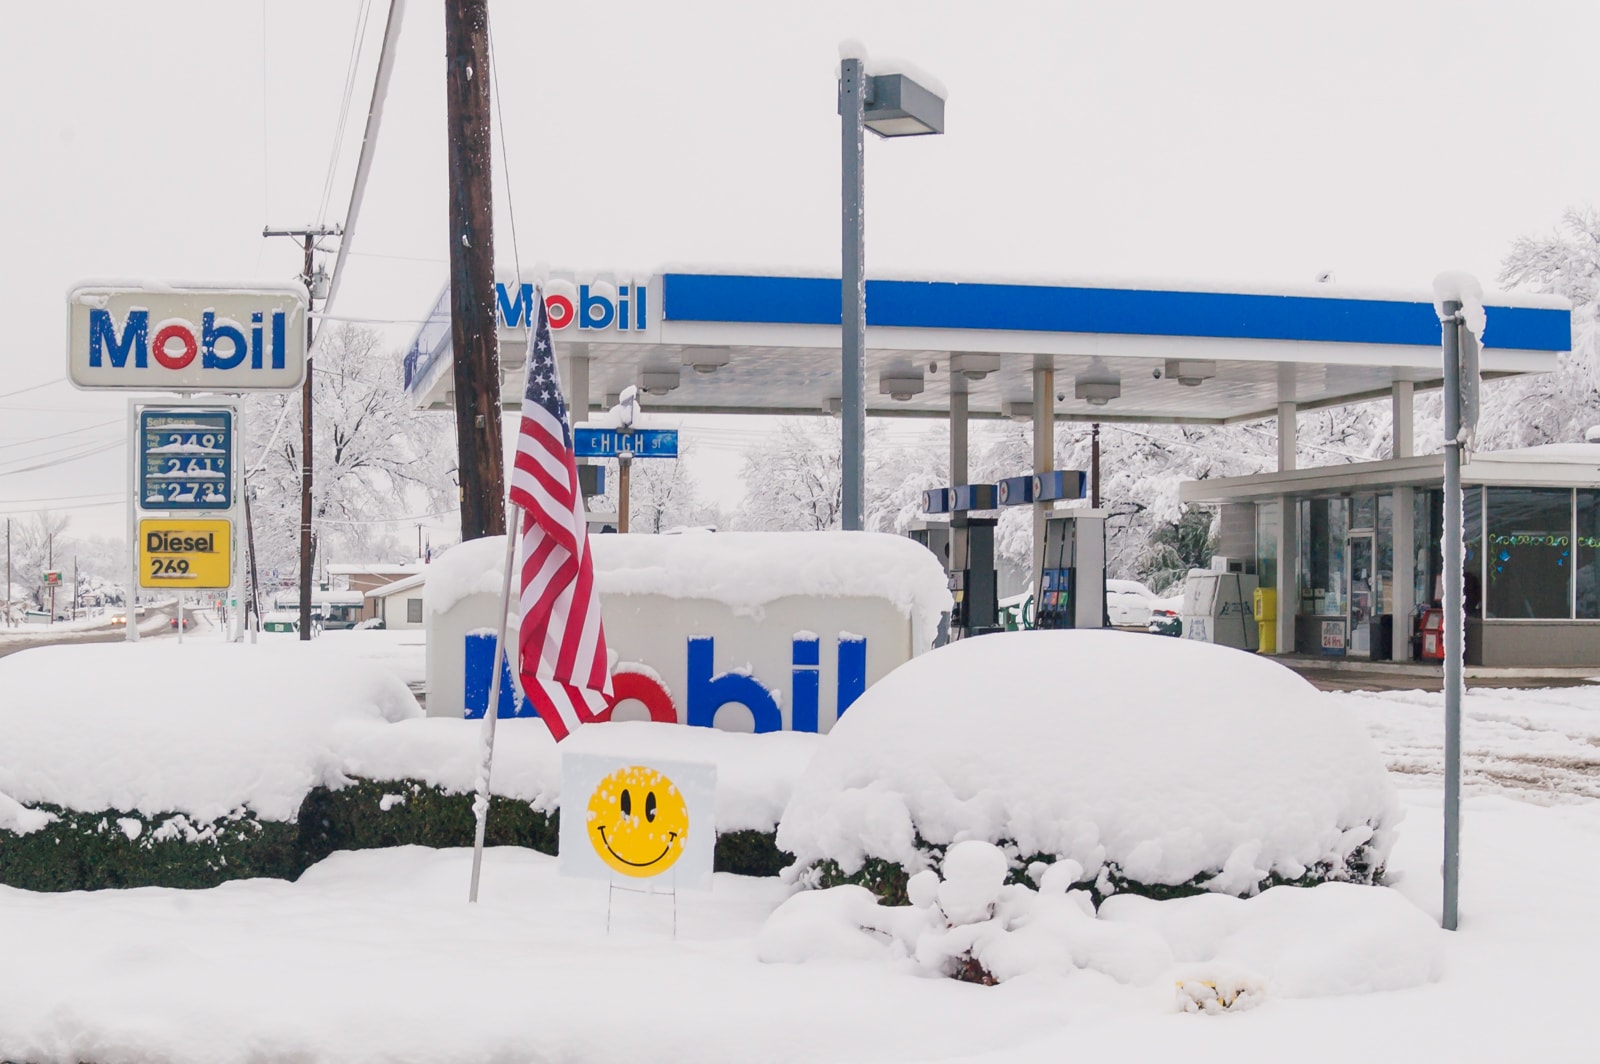 Mobile gas station in the 2010 North American Blizzard